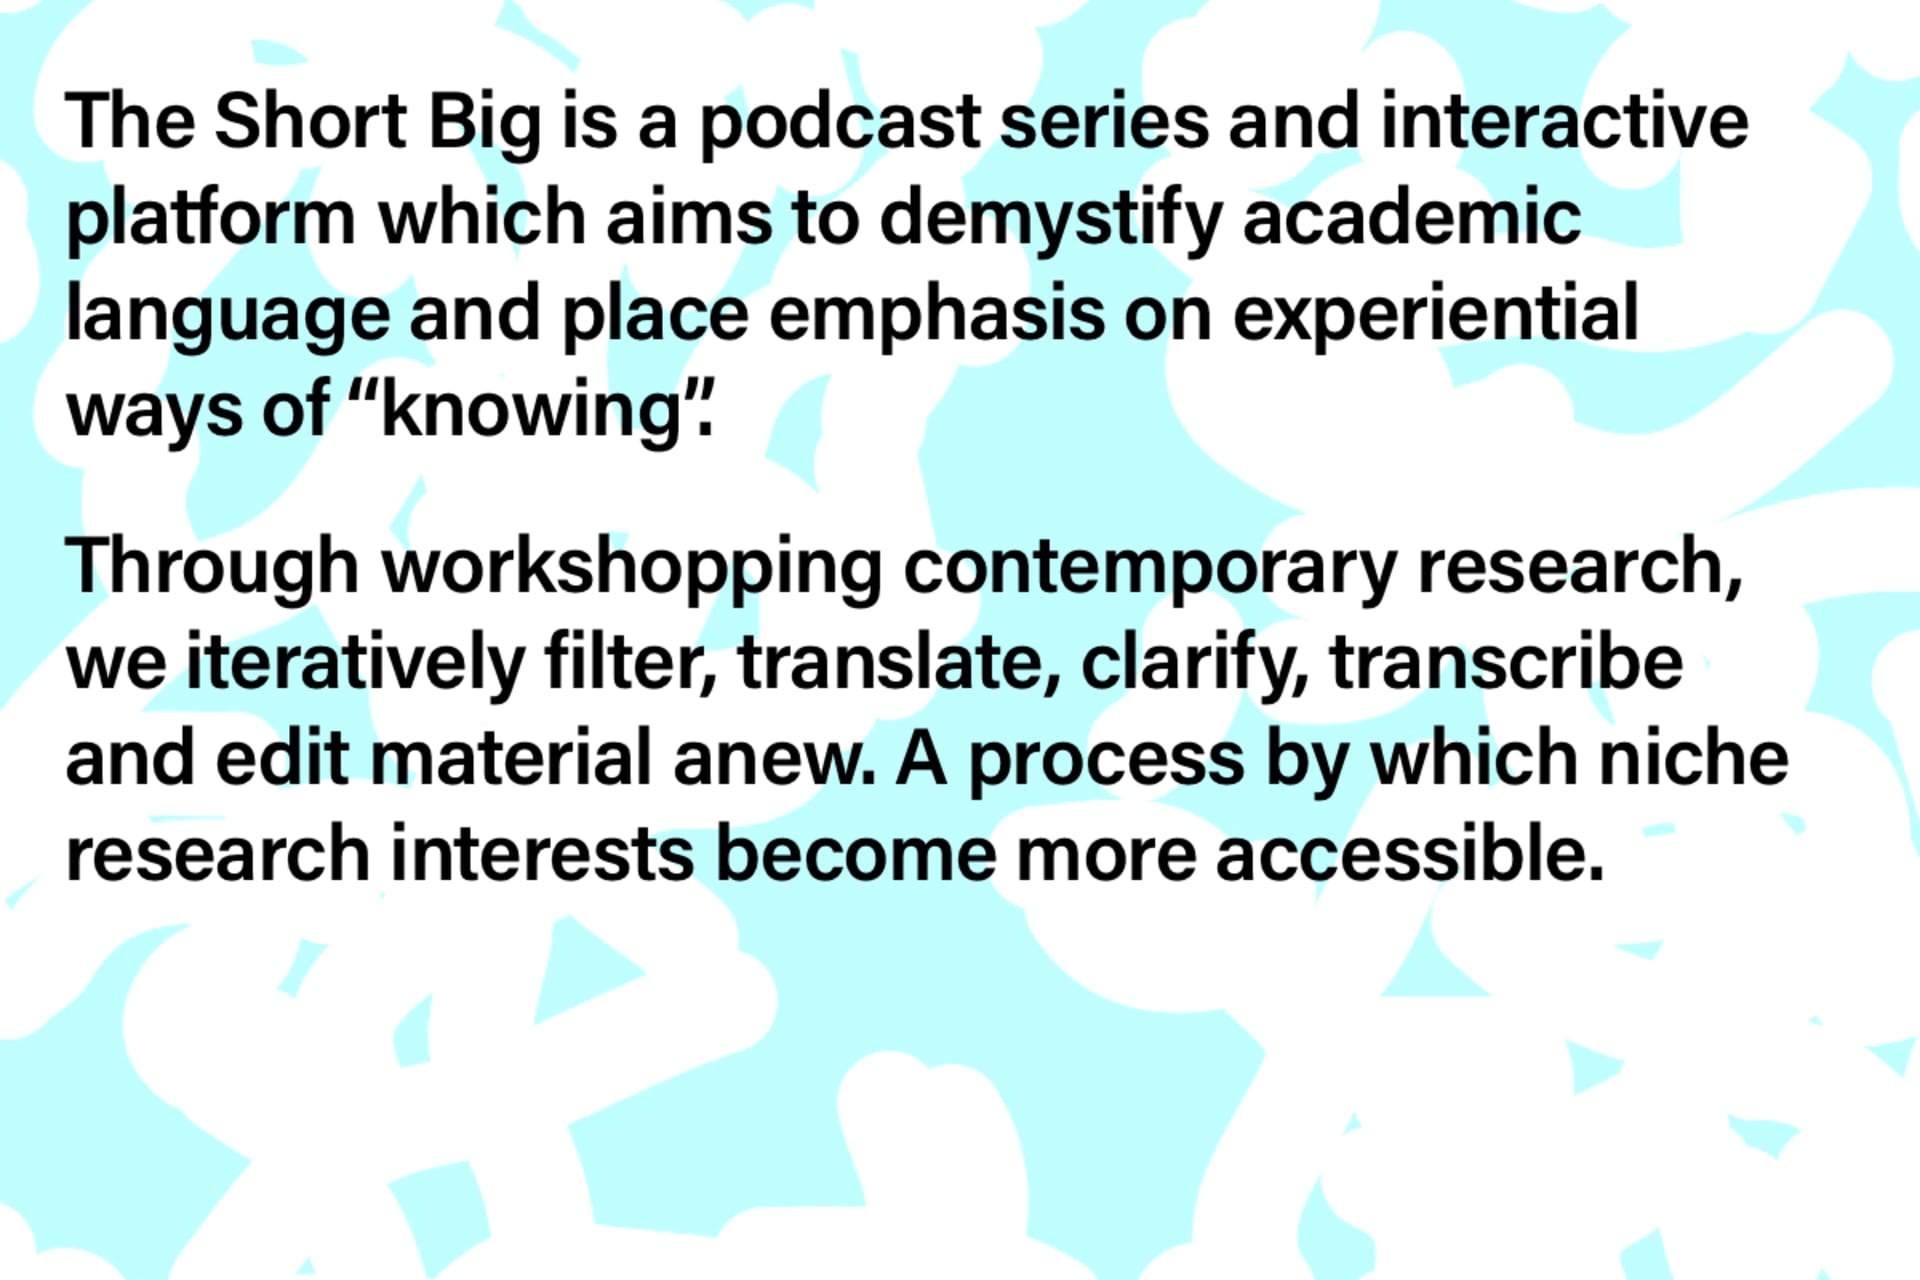 The Short Big is a podcast series and interactive platform which aims to demystify academic language